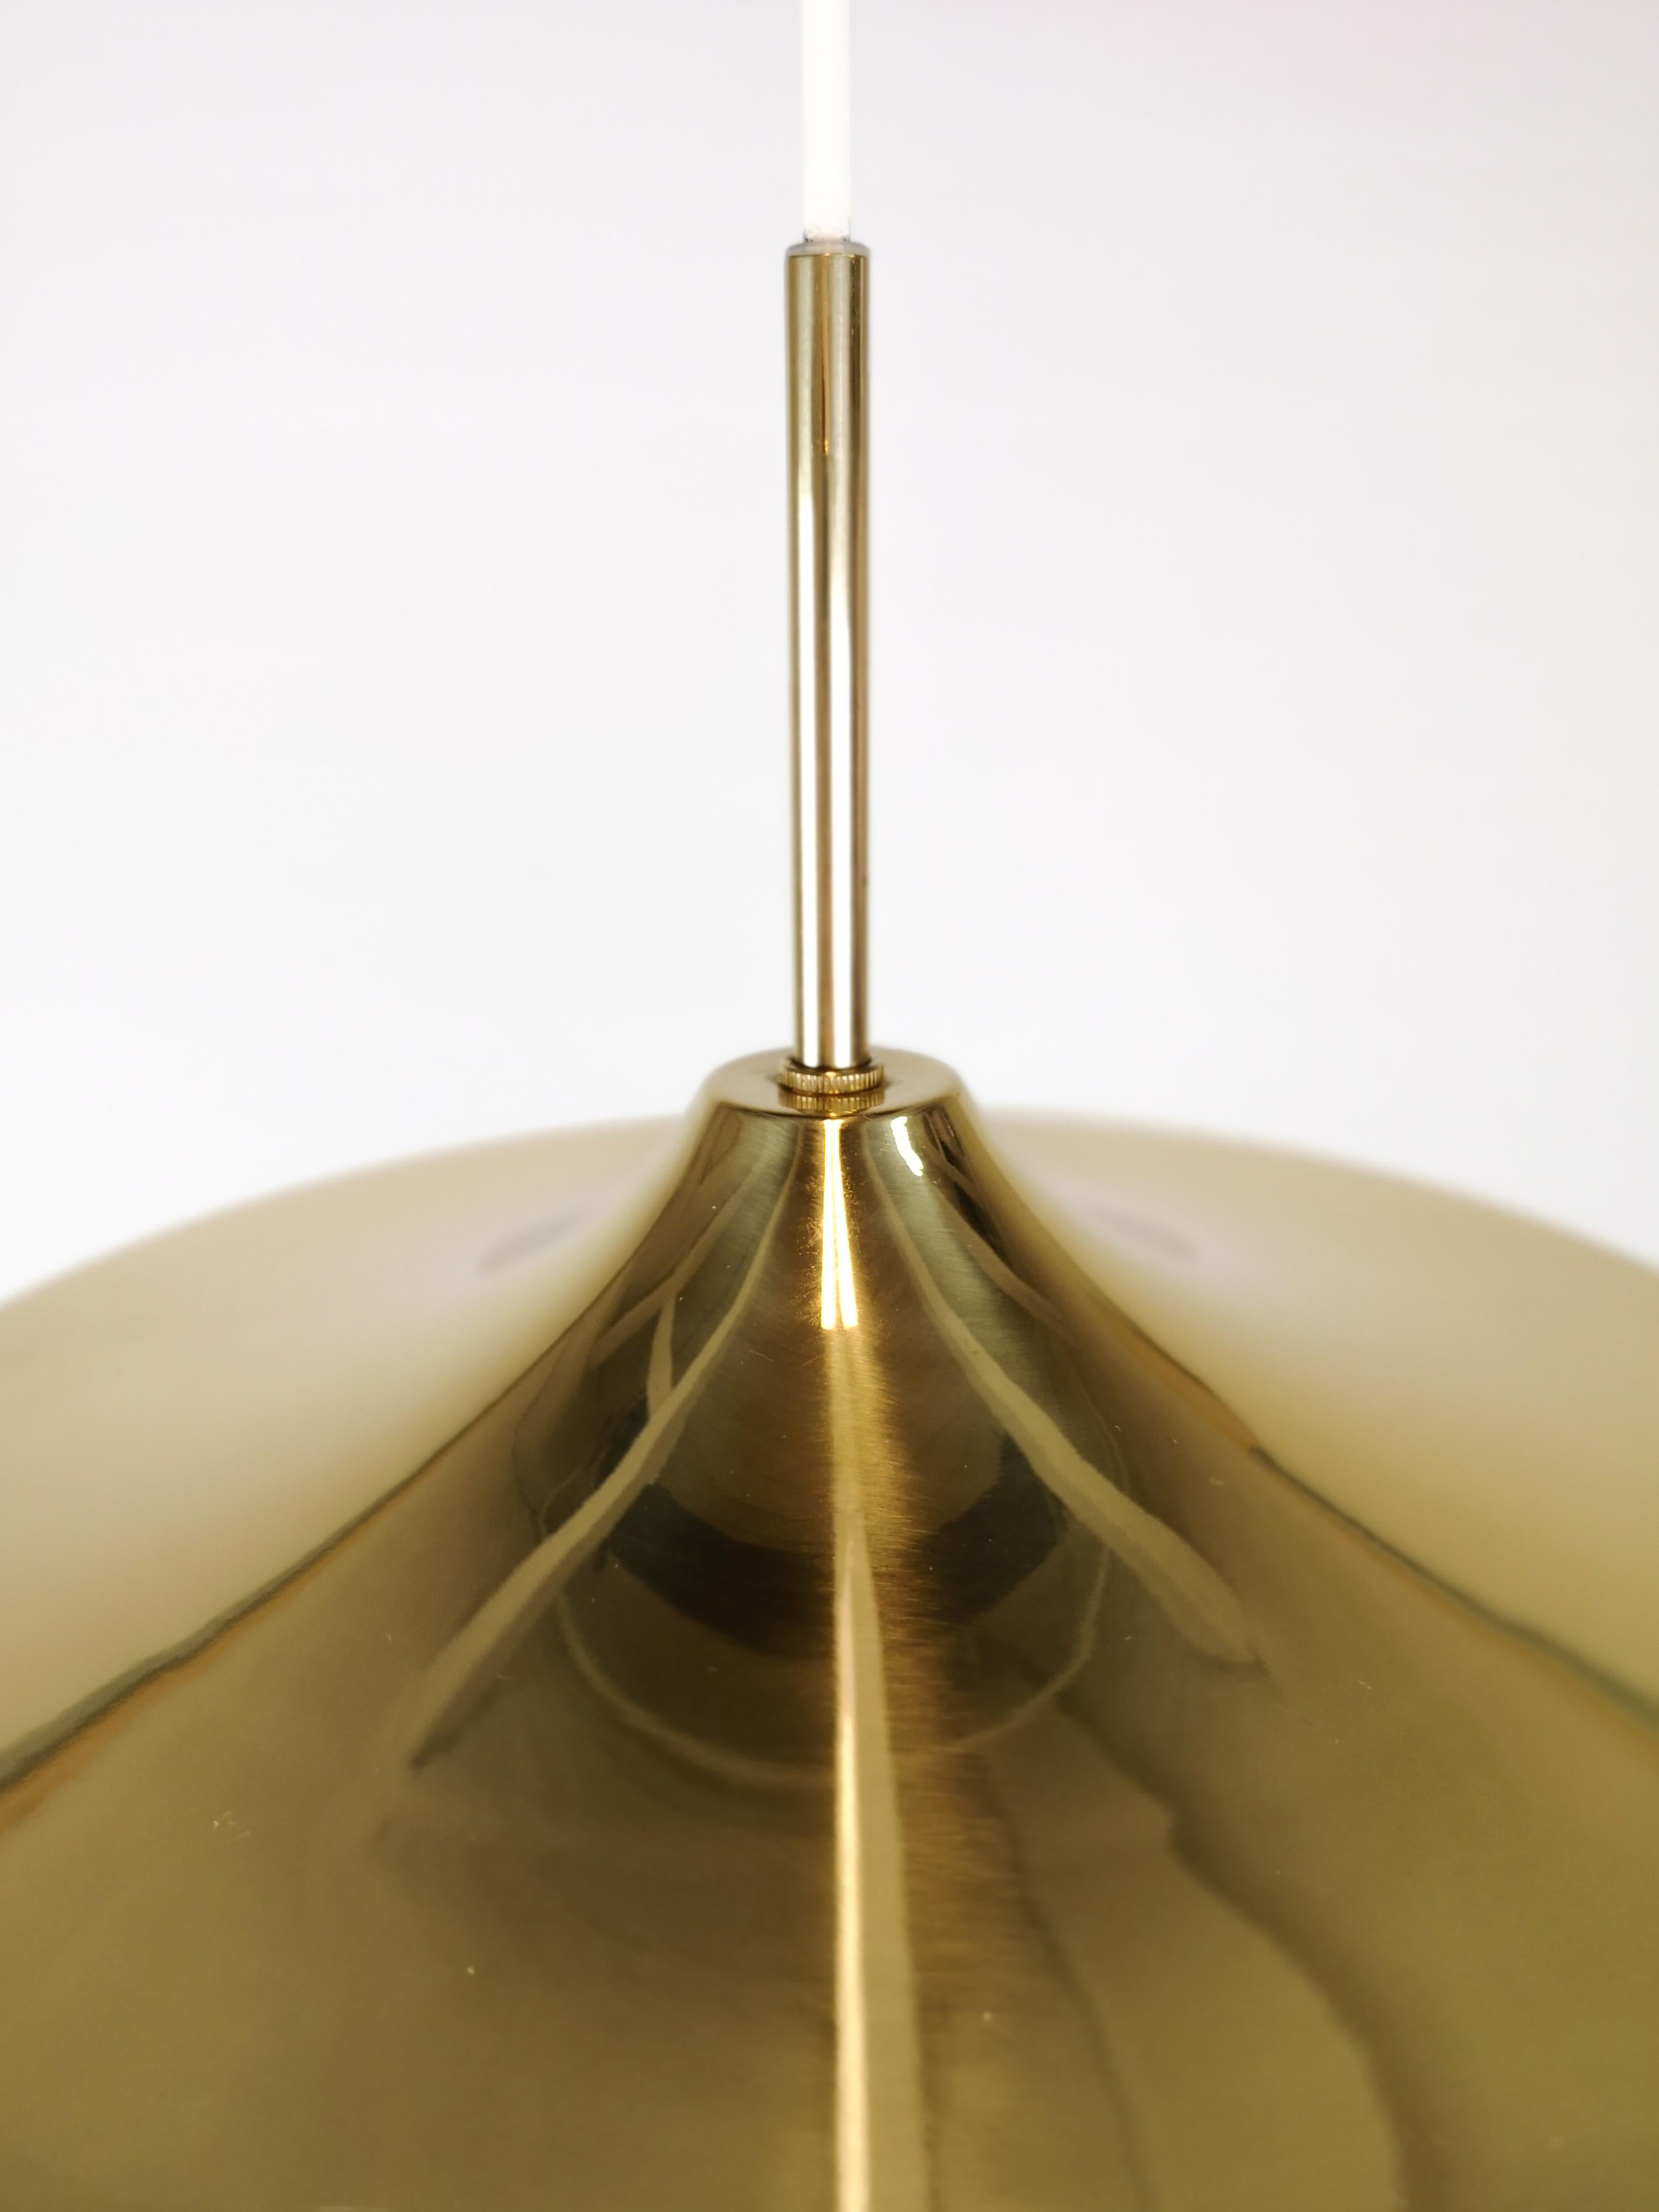 Wonderful ceiling lamp produced in Sweden for Hans-Agne Jakobsson, Markaryd, Sweden, 1960, design by Hans-Agne Jakobsson. The lamps fringes and brass is in very good condition.

Measures: H 36 cm x D 28 cm the total height is possible to adjust.
 